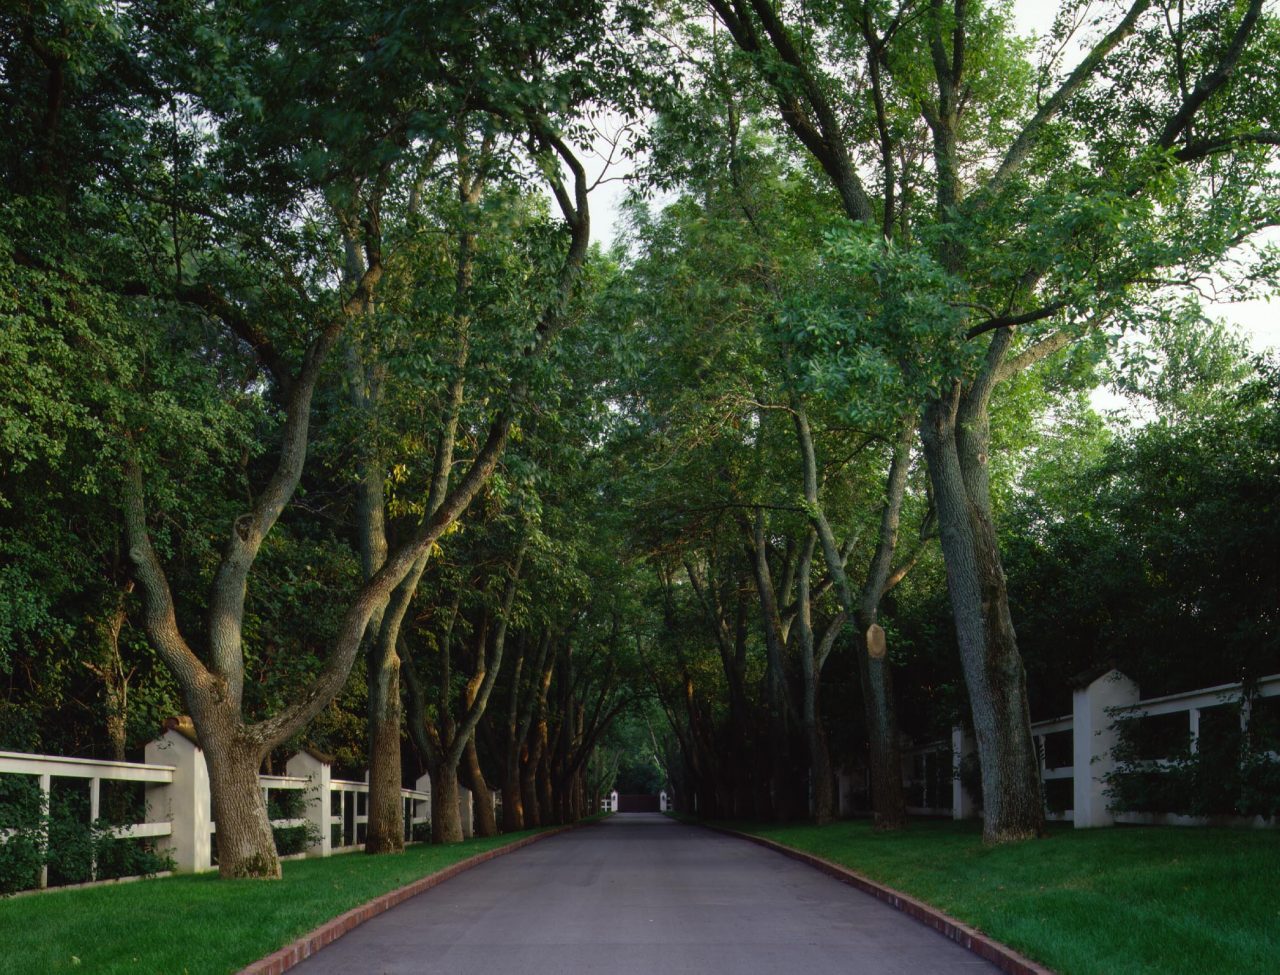 View of a driveway lined with trees